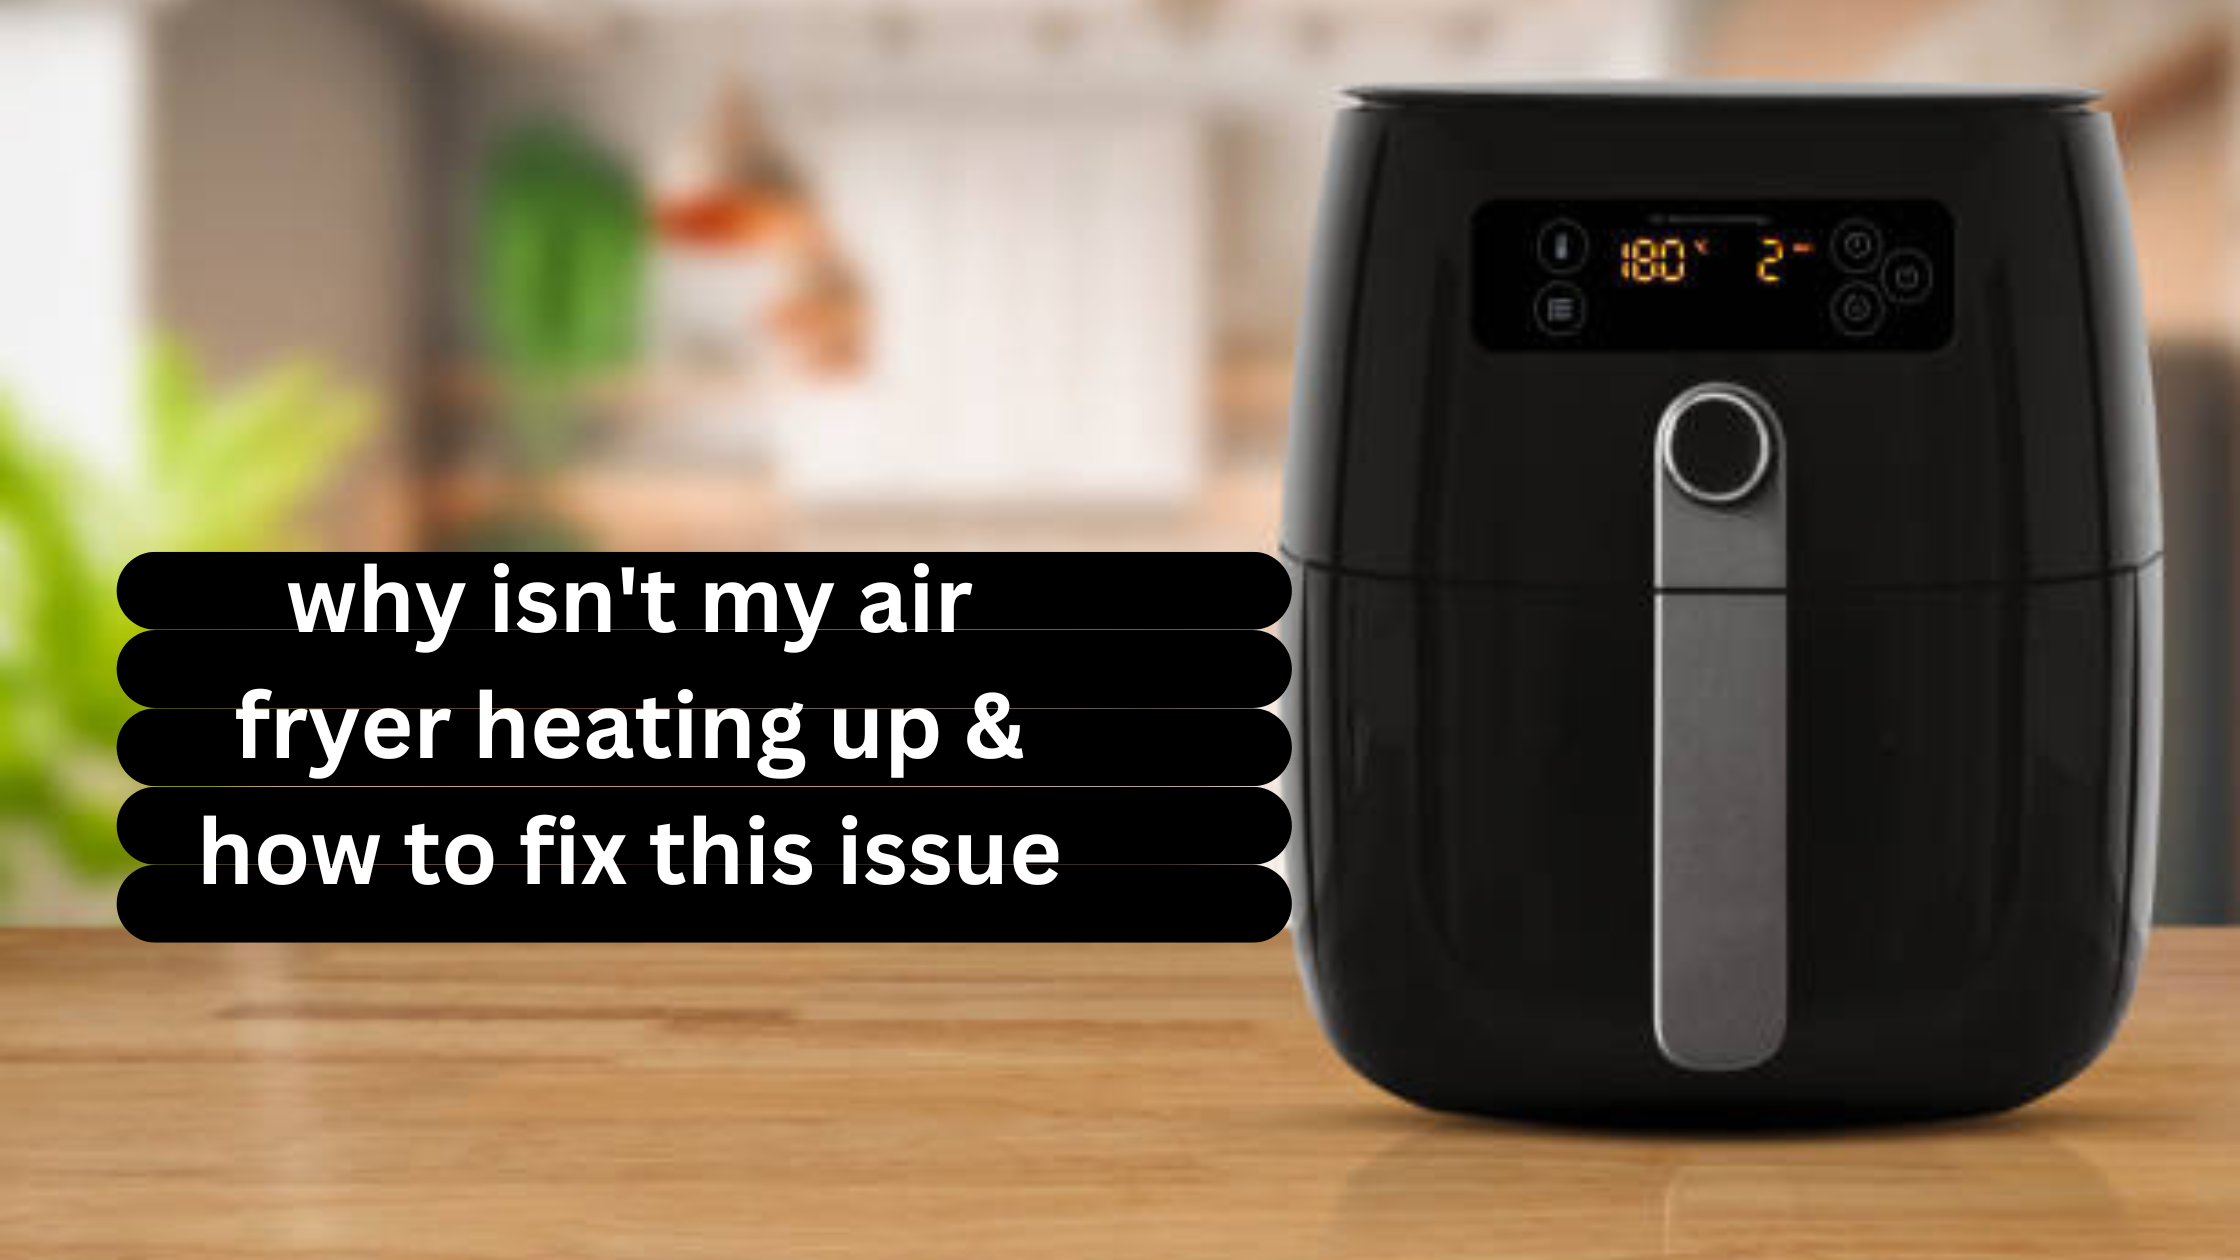 why isn't my air fryer heating up & how to fix this issue